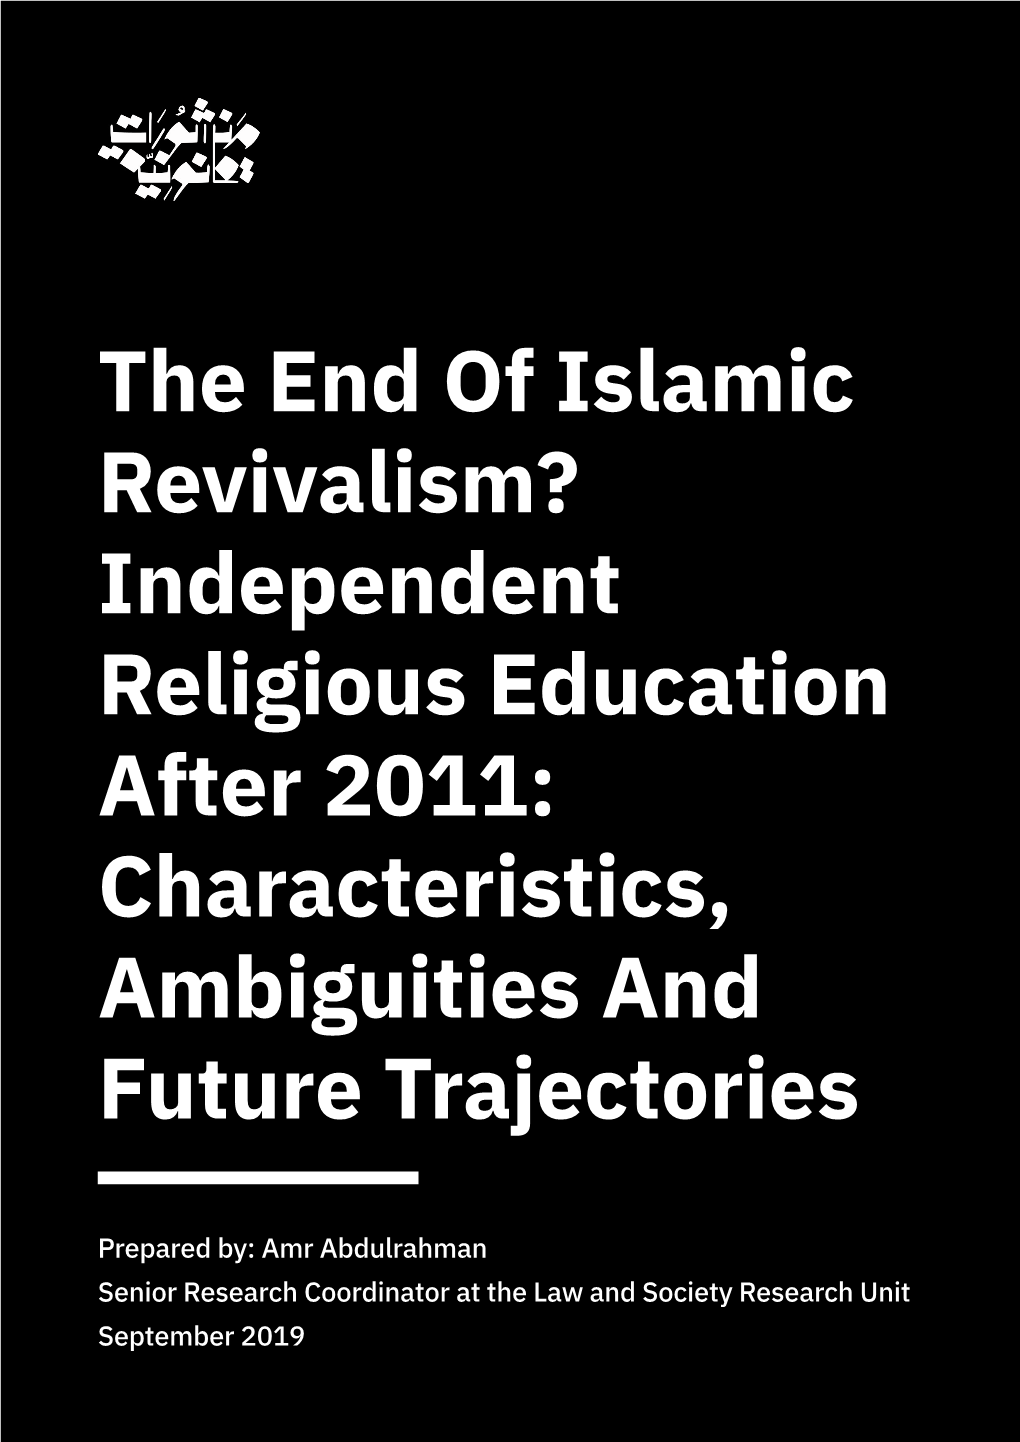 The End of Islamic Revivalism? Independent Religious Education After 2011: Characteristics, Ambiguities and Future Trajectories